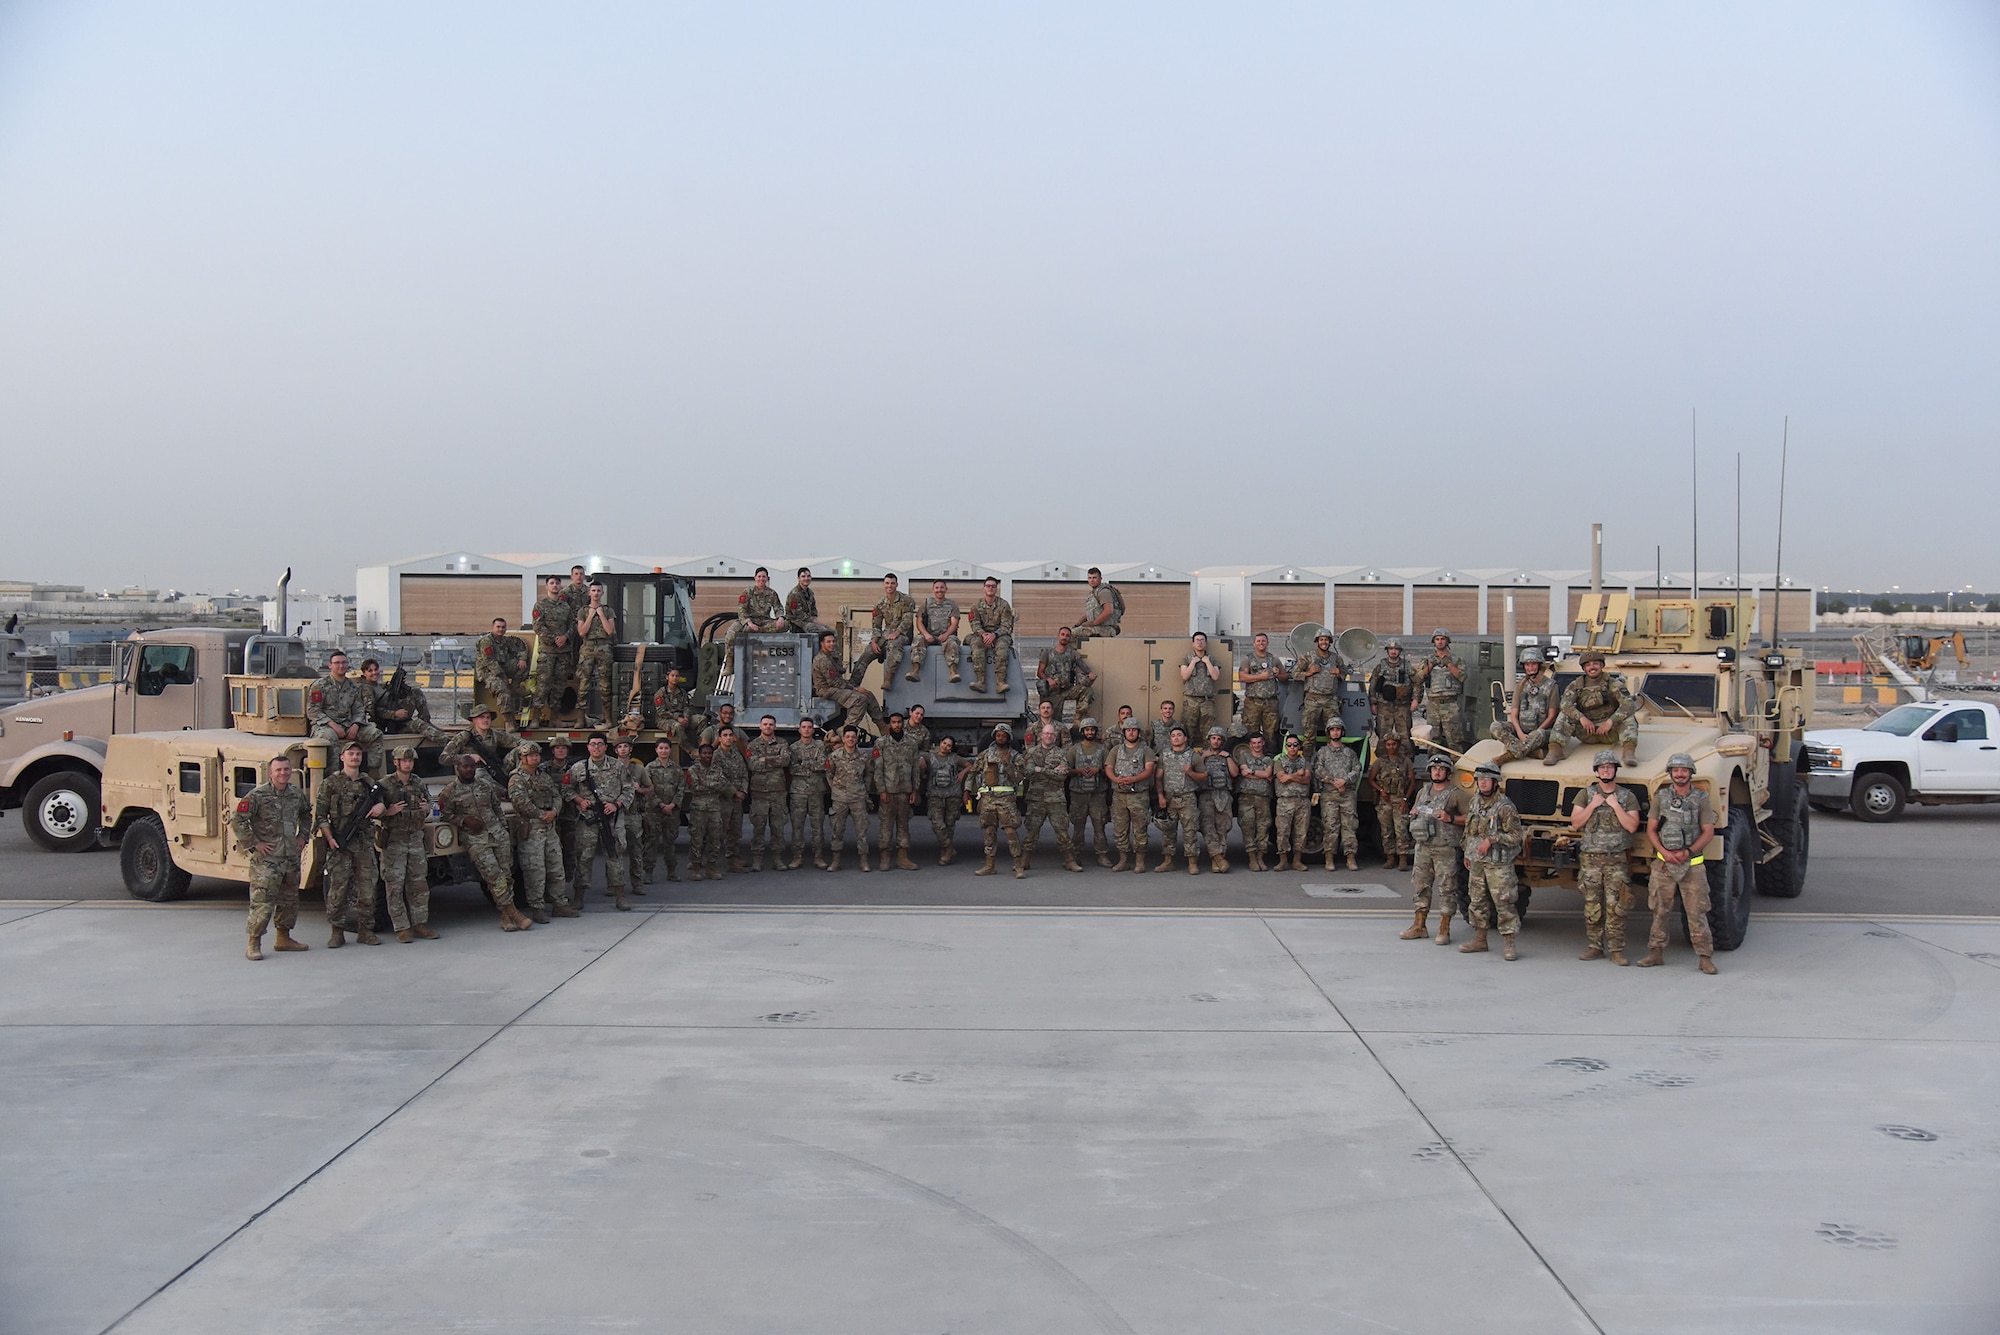 Service members from across Al Dhafra Air Base, United Arab Emirates, pose for a group photo during the Operation Agile Spartan 4 exercise March 11, 2023. The exercise took place throughout the U.S. Air Force Central Command’s area of responsibility and included exercising of Agile Combat Employment and Multi-Capable Airman skills. (U.S. Air Force photo by Tech. Sgt. Chris Jacobs/released)